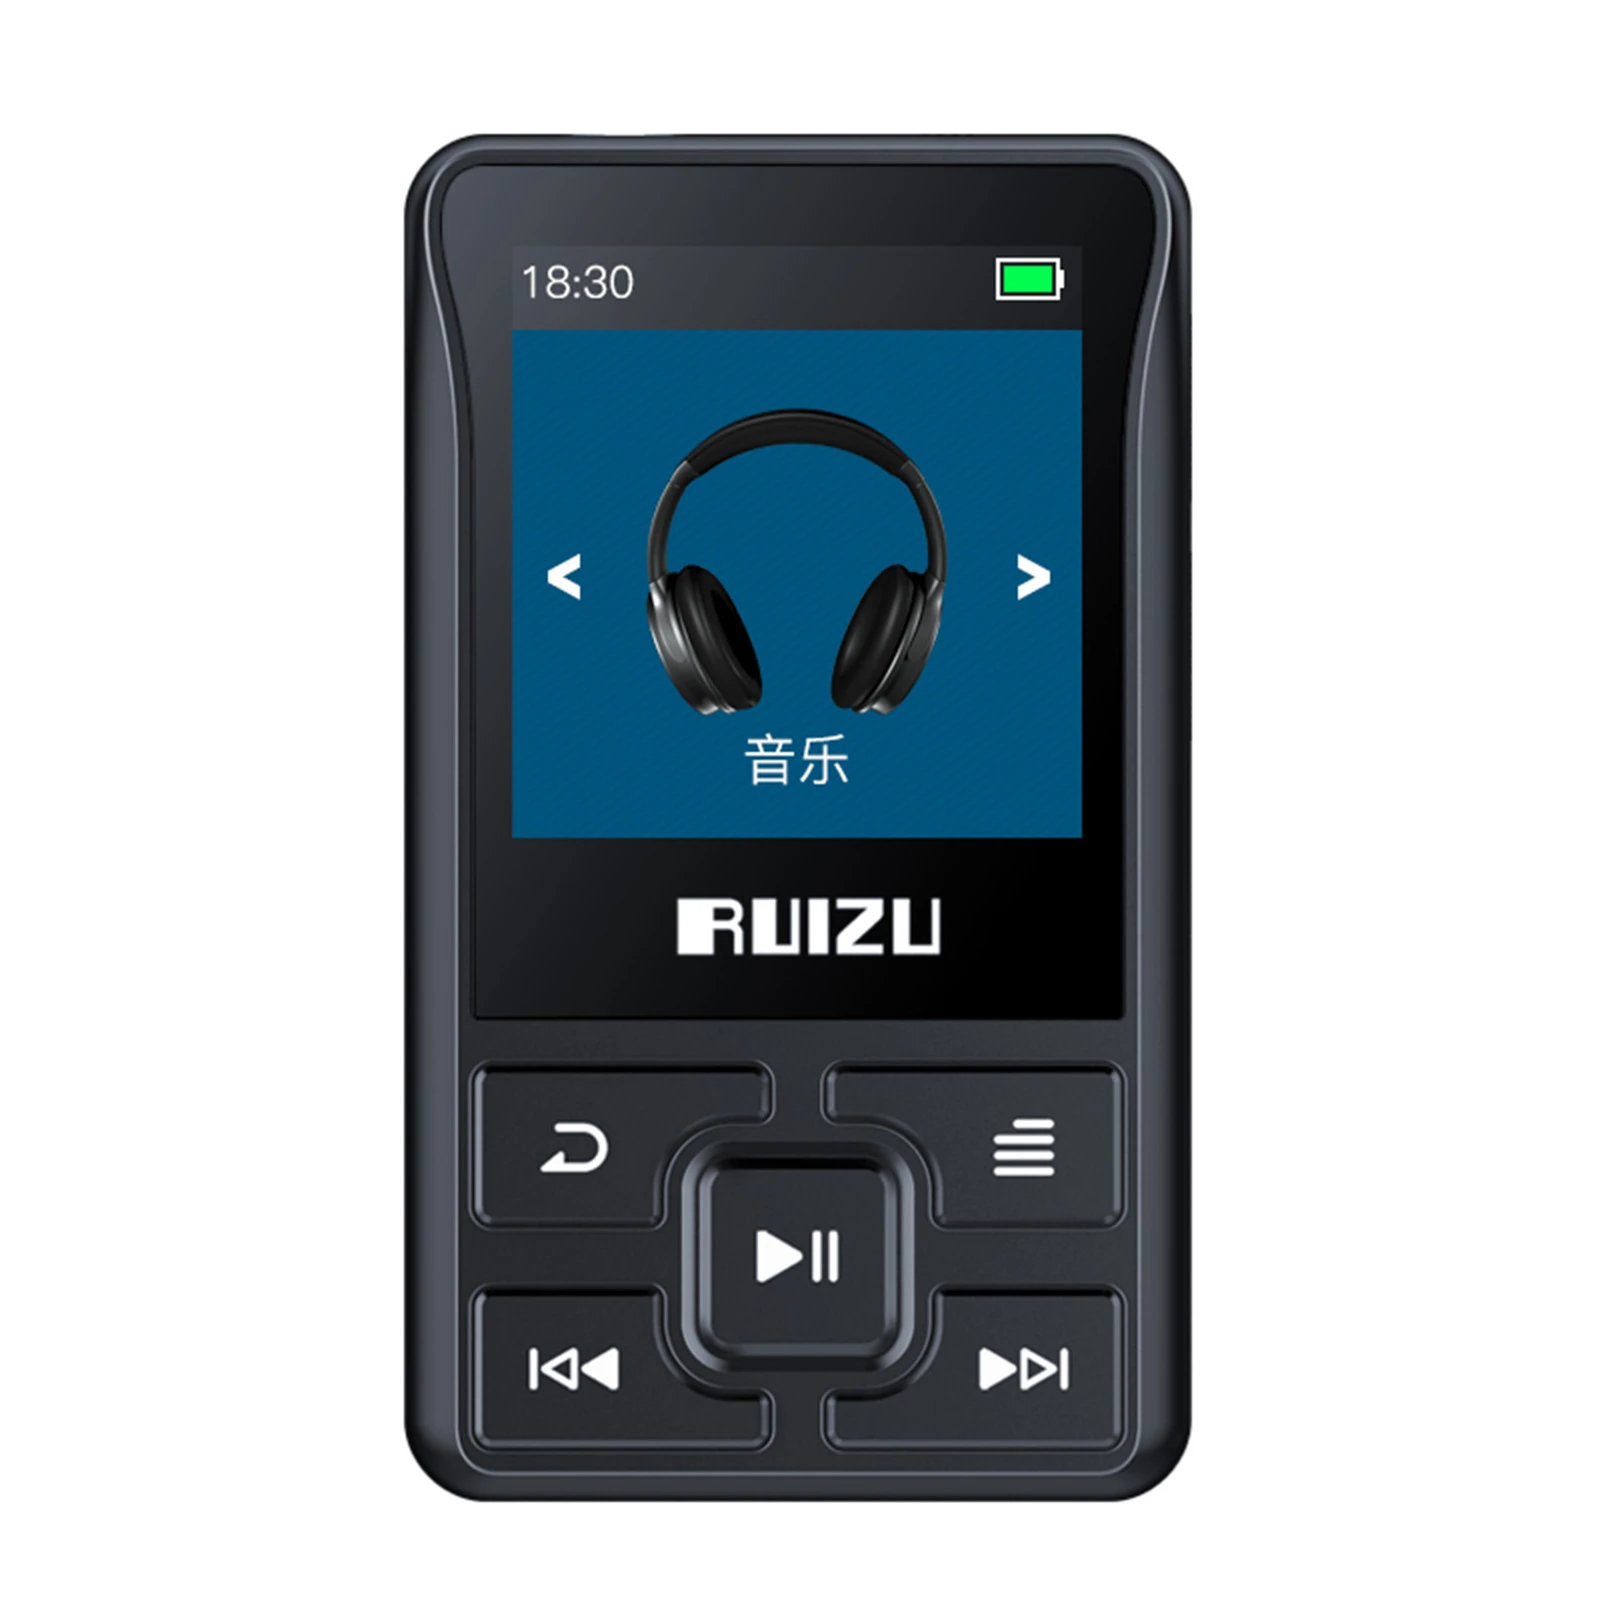 RUIZU X55 Bluetooth MP3 Portable Music Video Player 1.5” Mini Music Player with Speaker FM Radio Recording Built-in 8G Memory ipod mp3 player